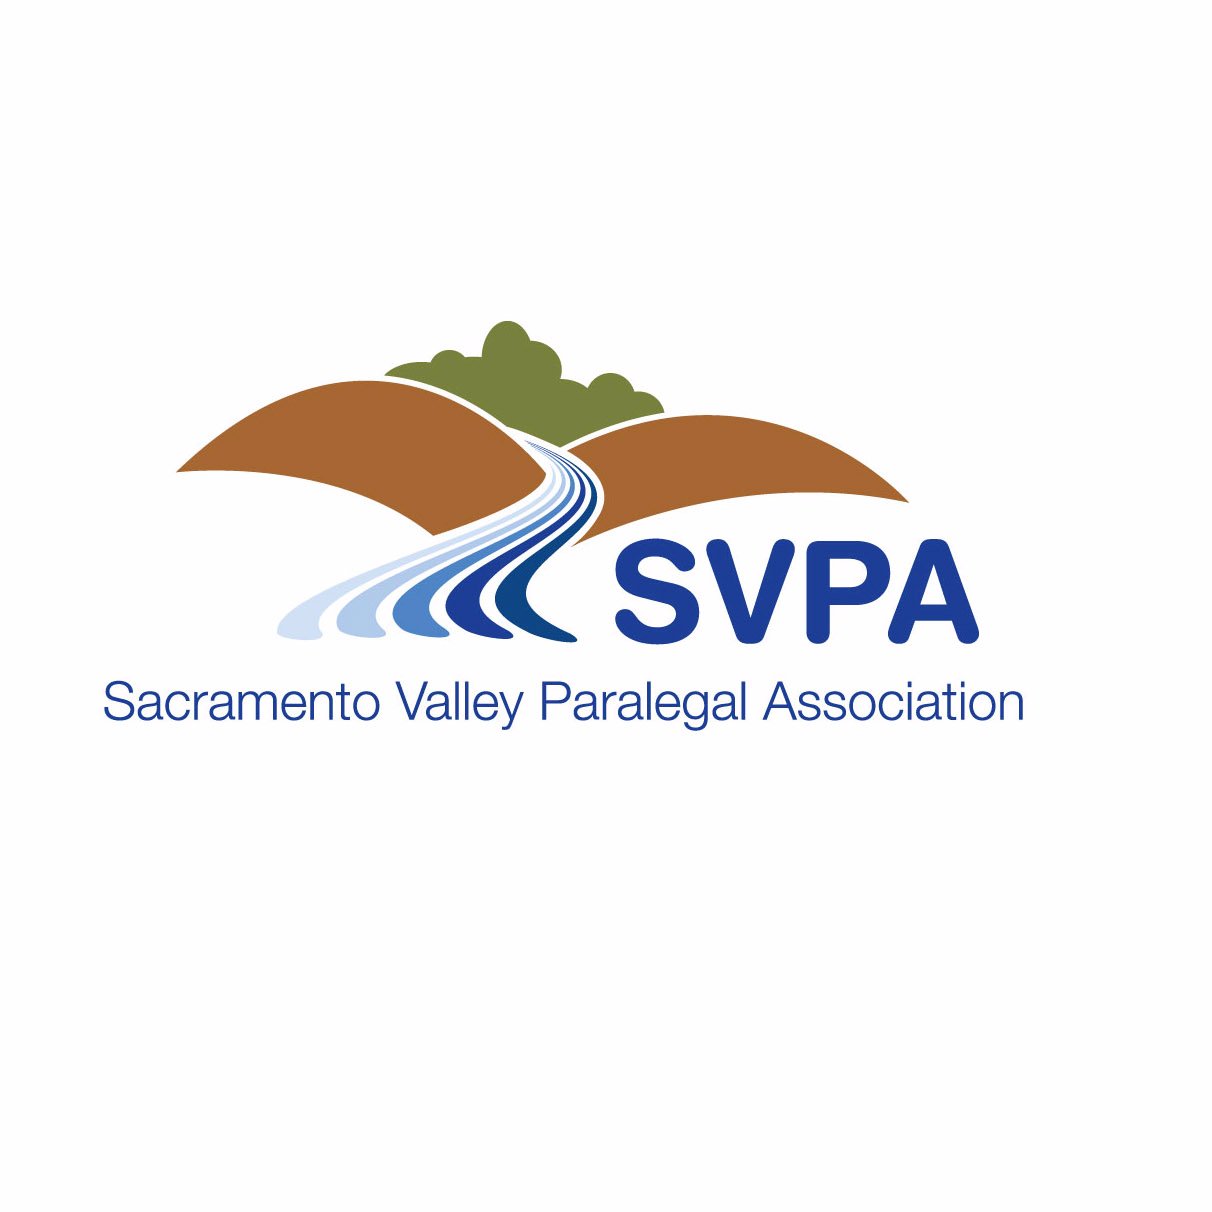 The Sacramento Valley Paralegal Association is a California nonprofit that is dedicated to promoting the paralegal profession.